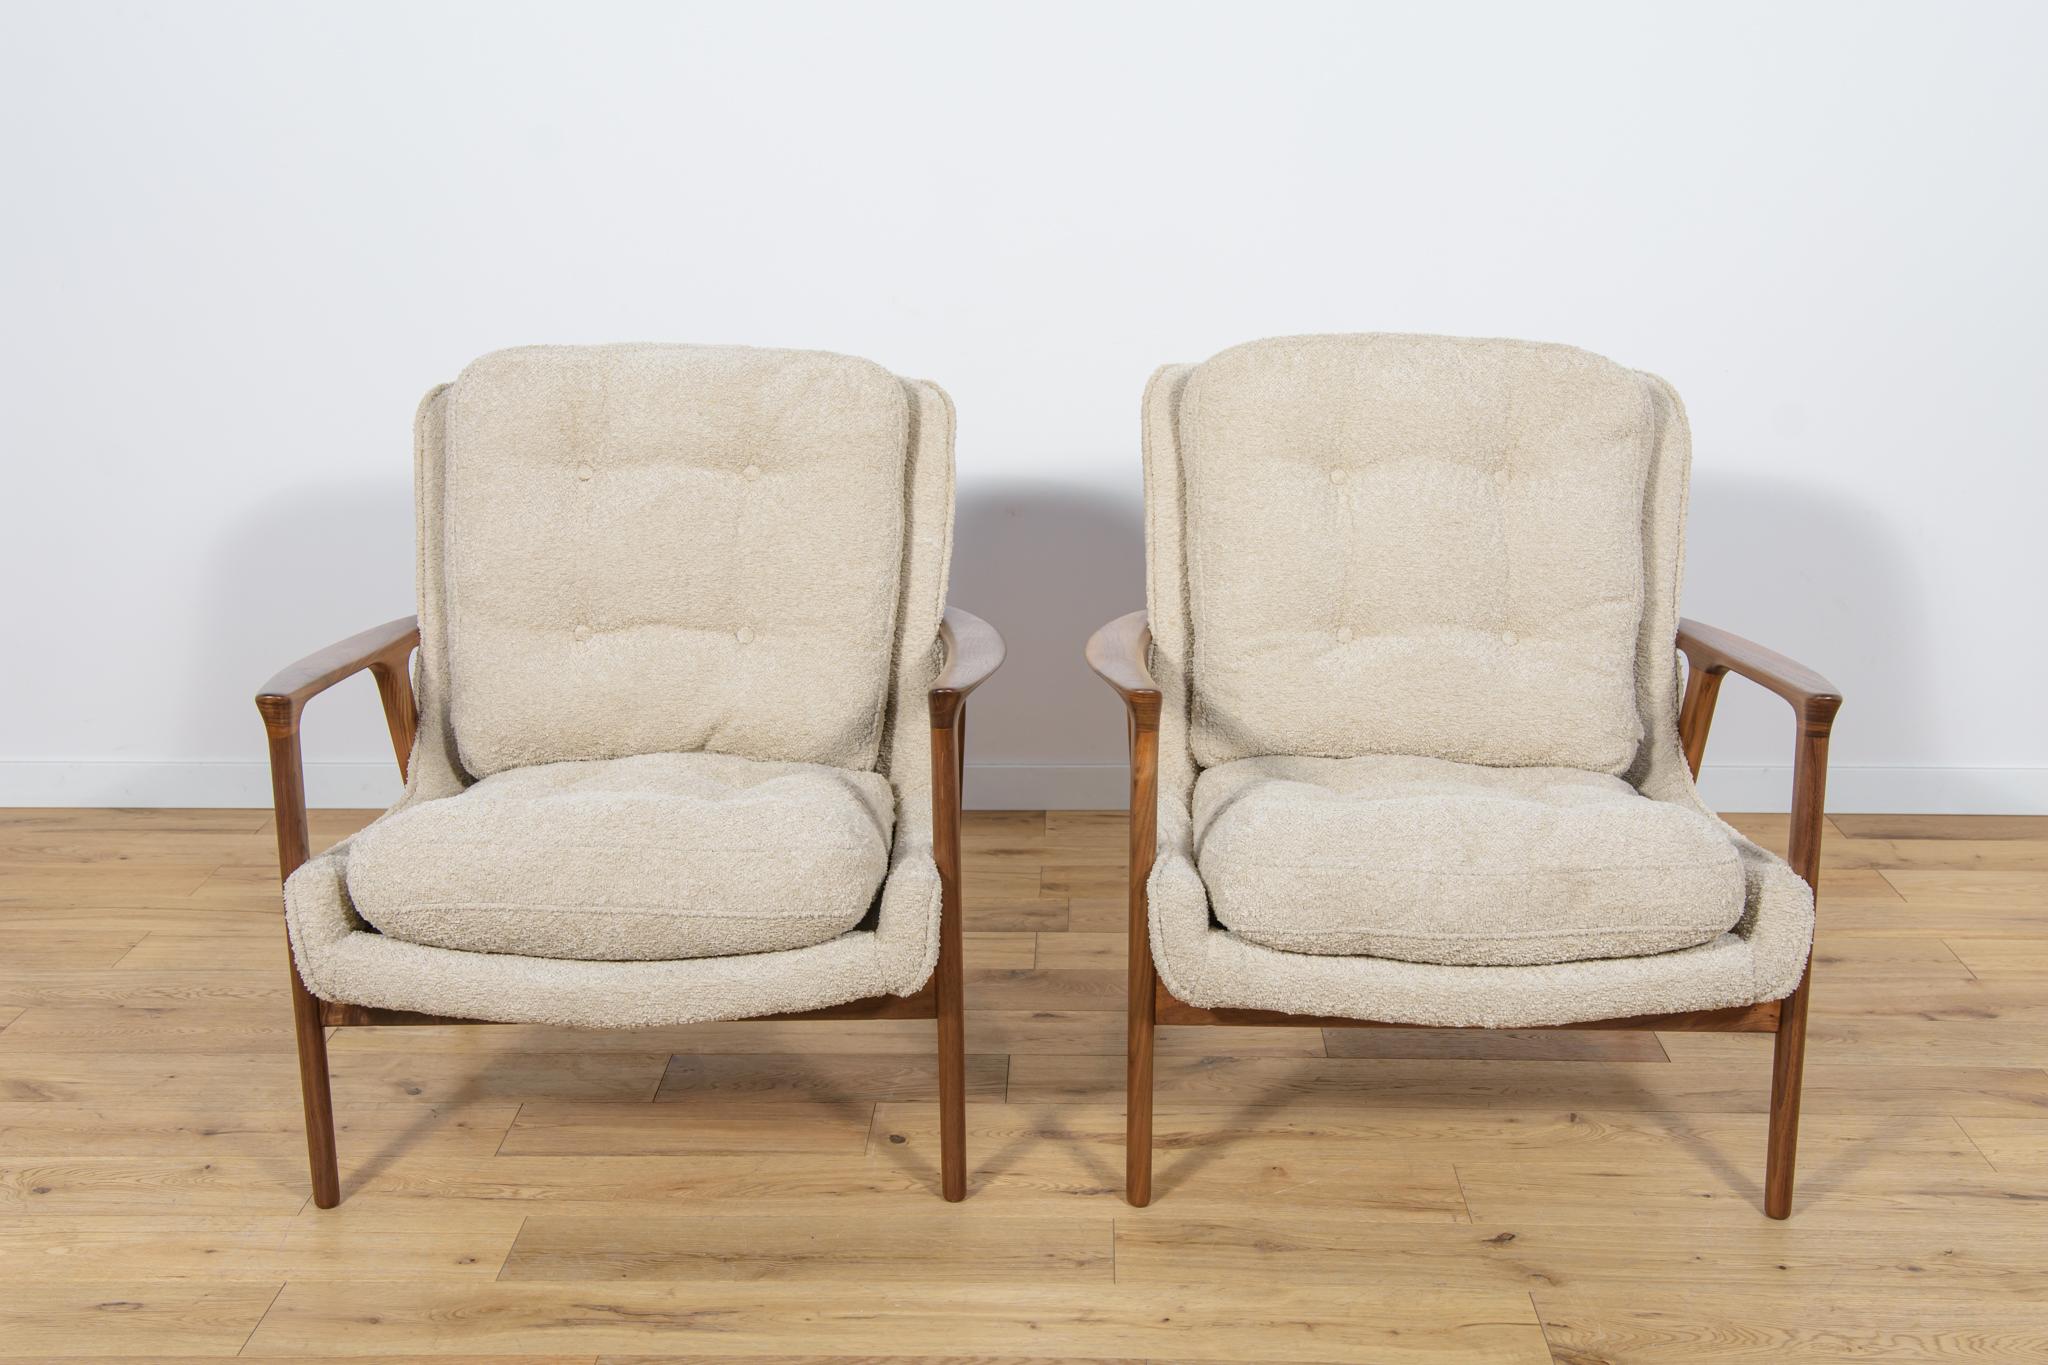 
Armchairs were designed by Inge Andersson for the Bröderna Andersson manufacture. This set of two Swedish armchairs was produced in the 1960s. The armchairs are characterized by high-quality materials and workmanship. Completely restored.